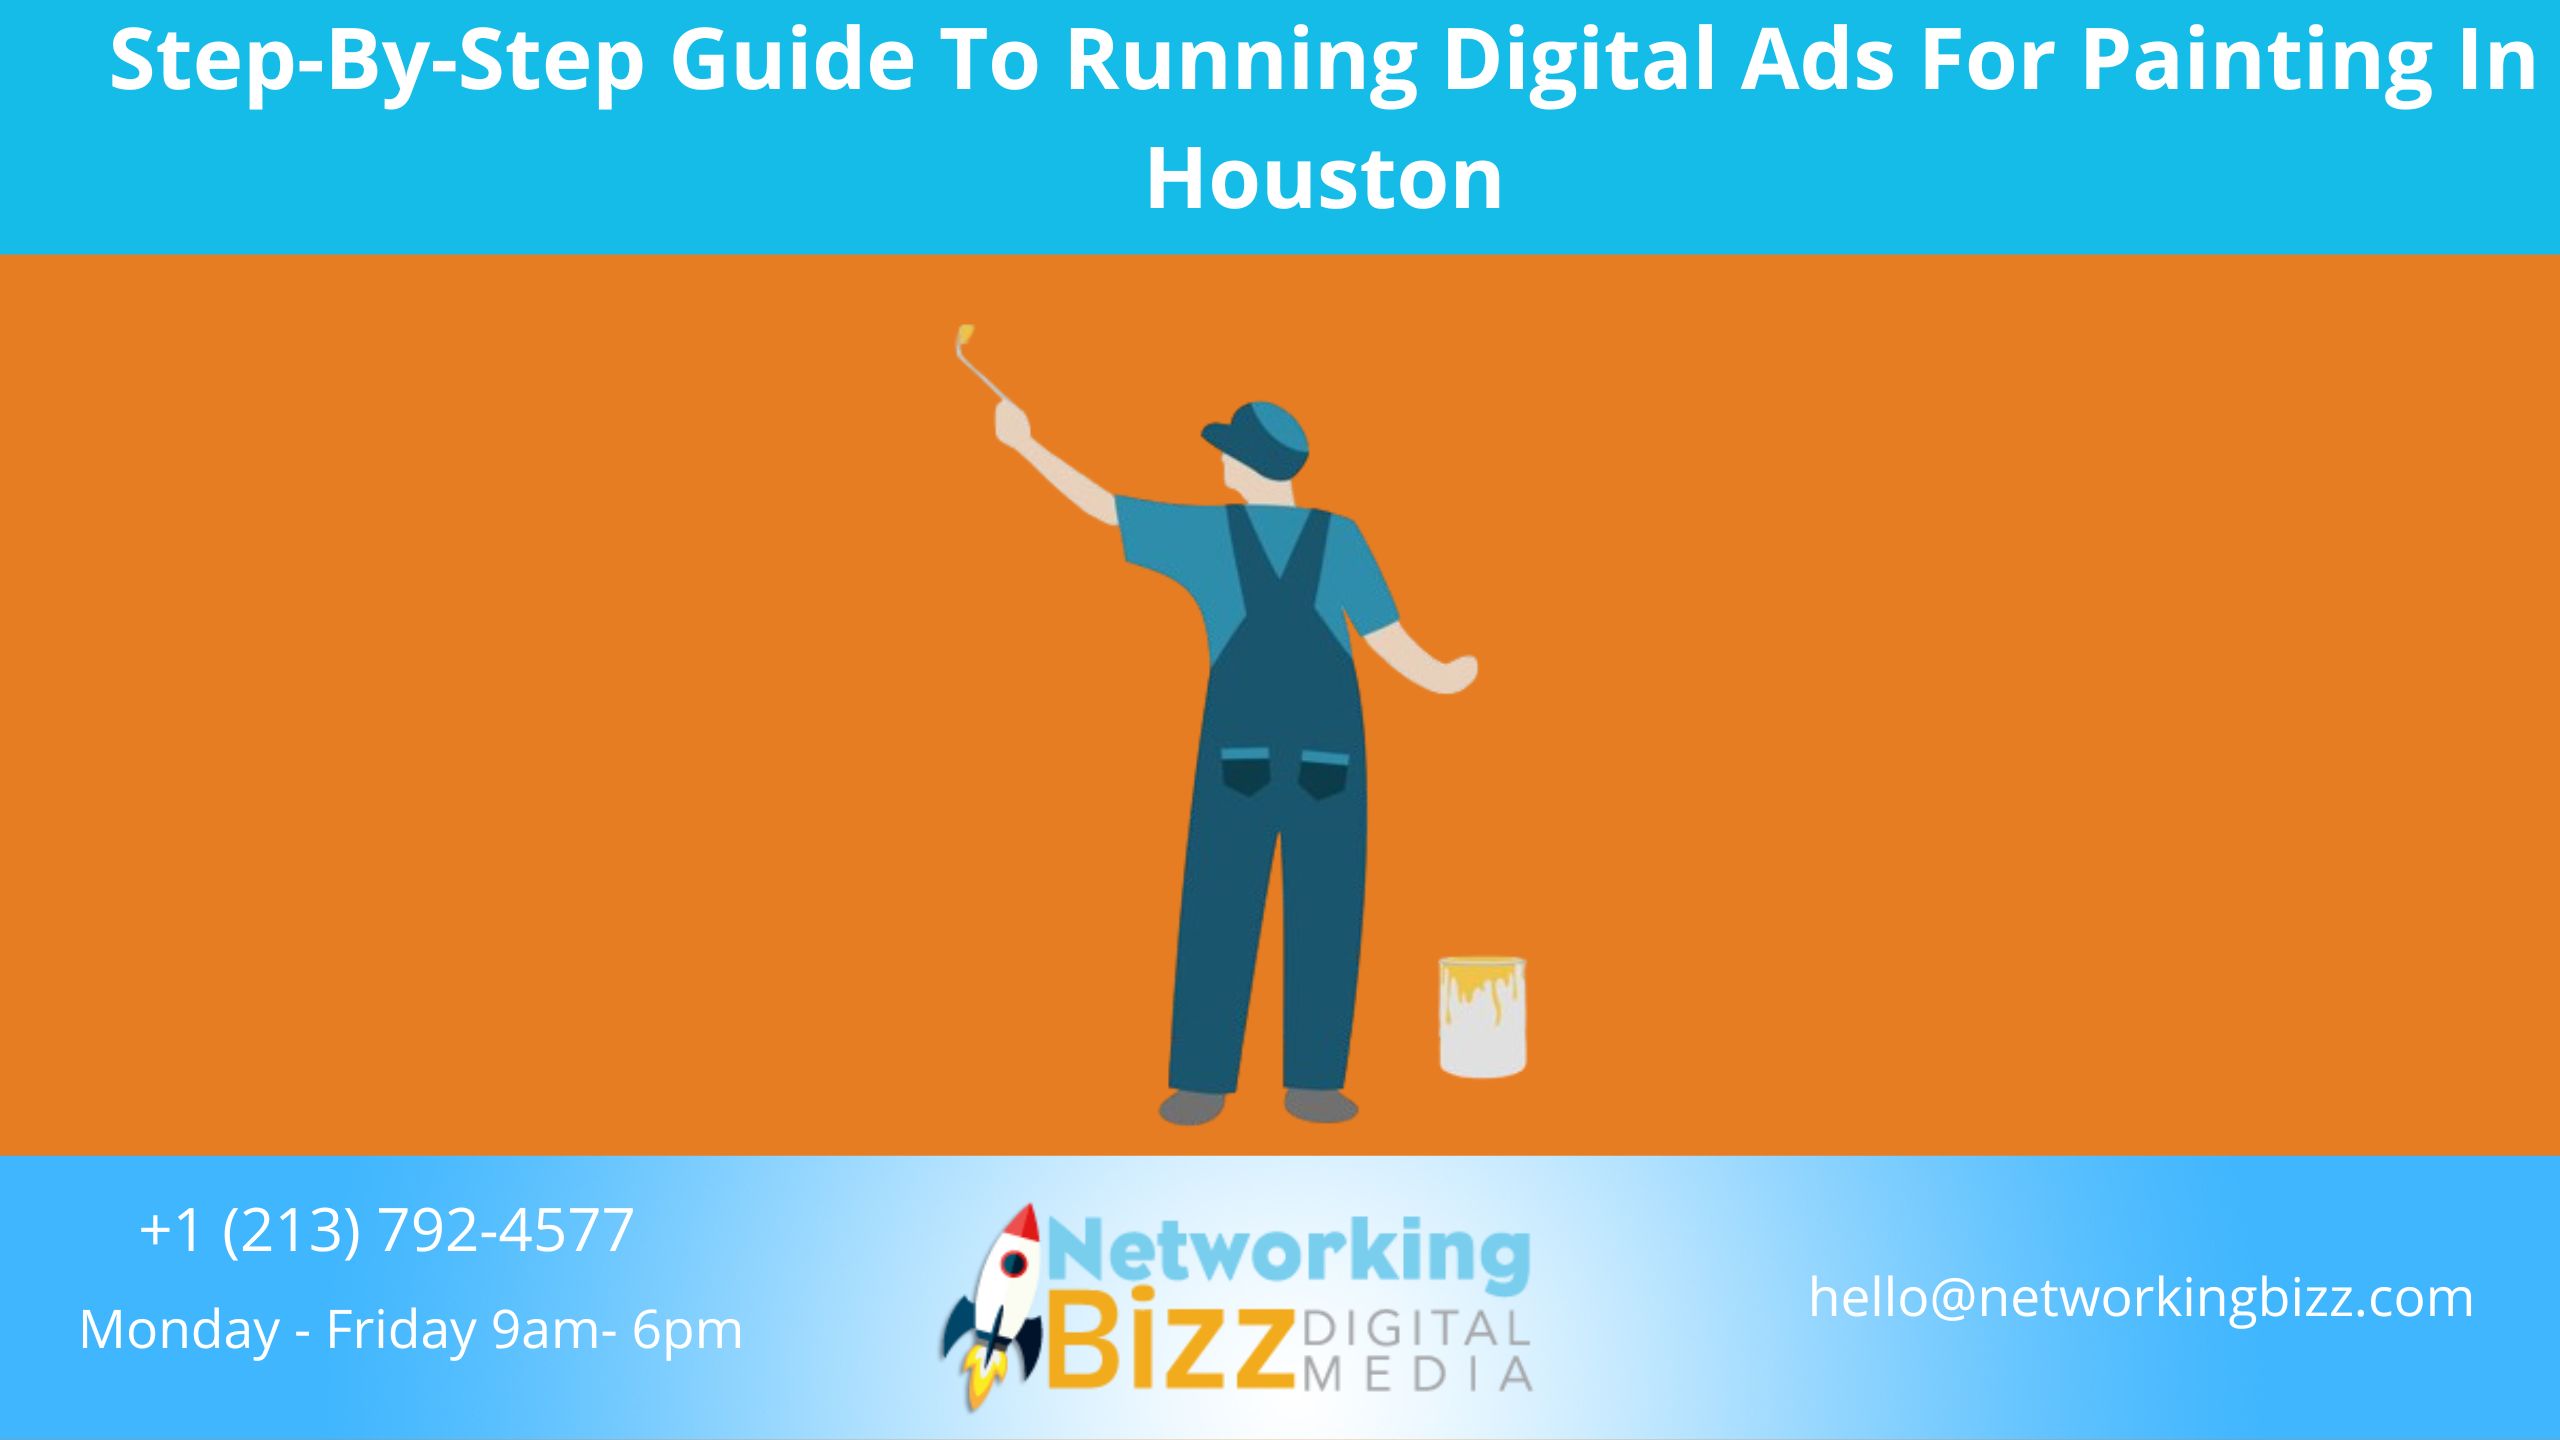 Step-By-Step Guide To Running Digital Ads For Painting In Houston